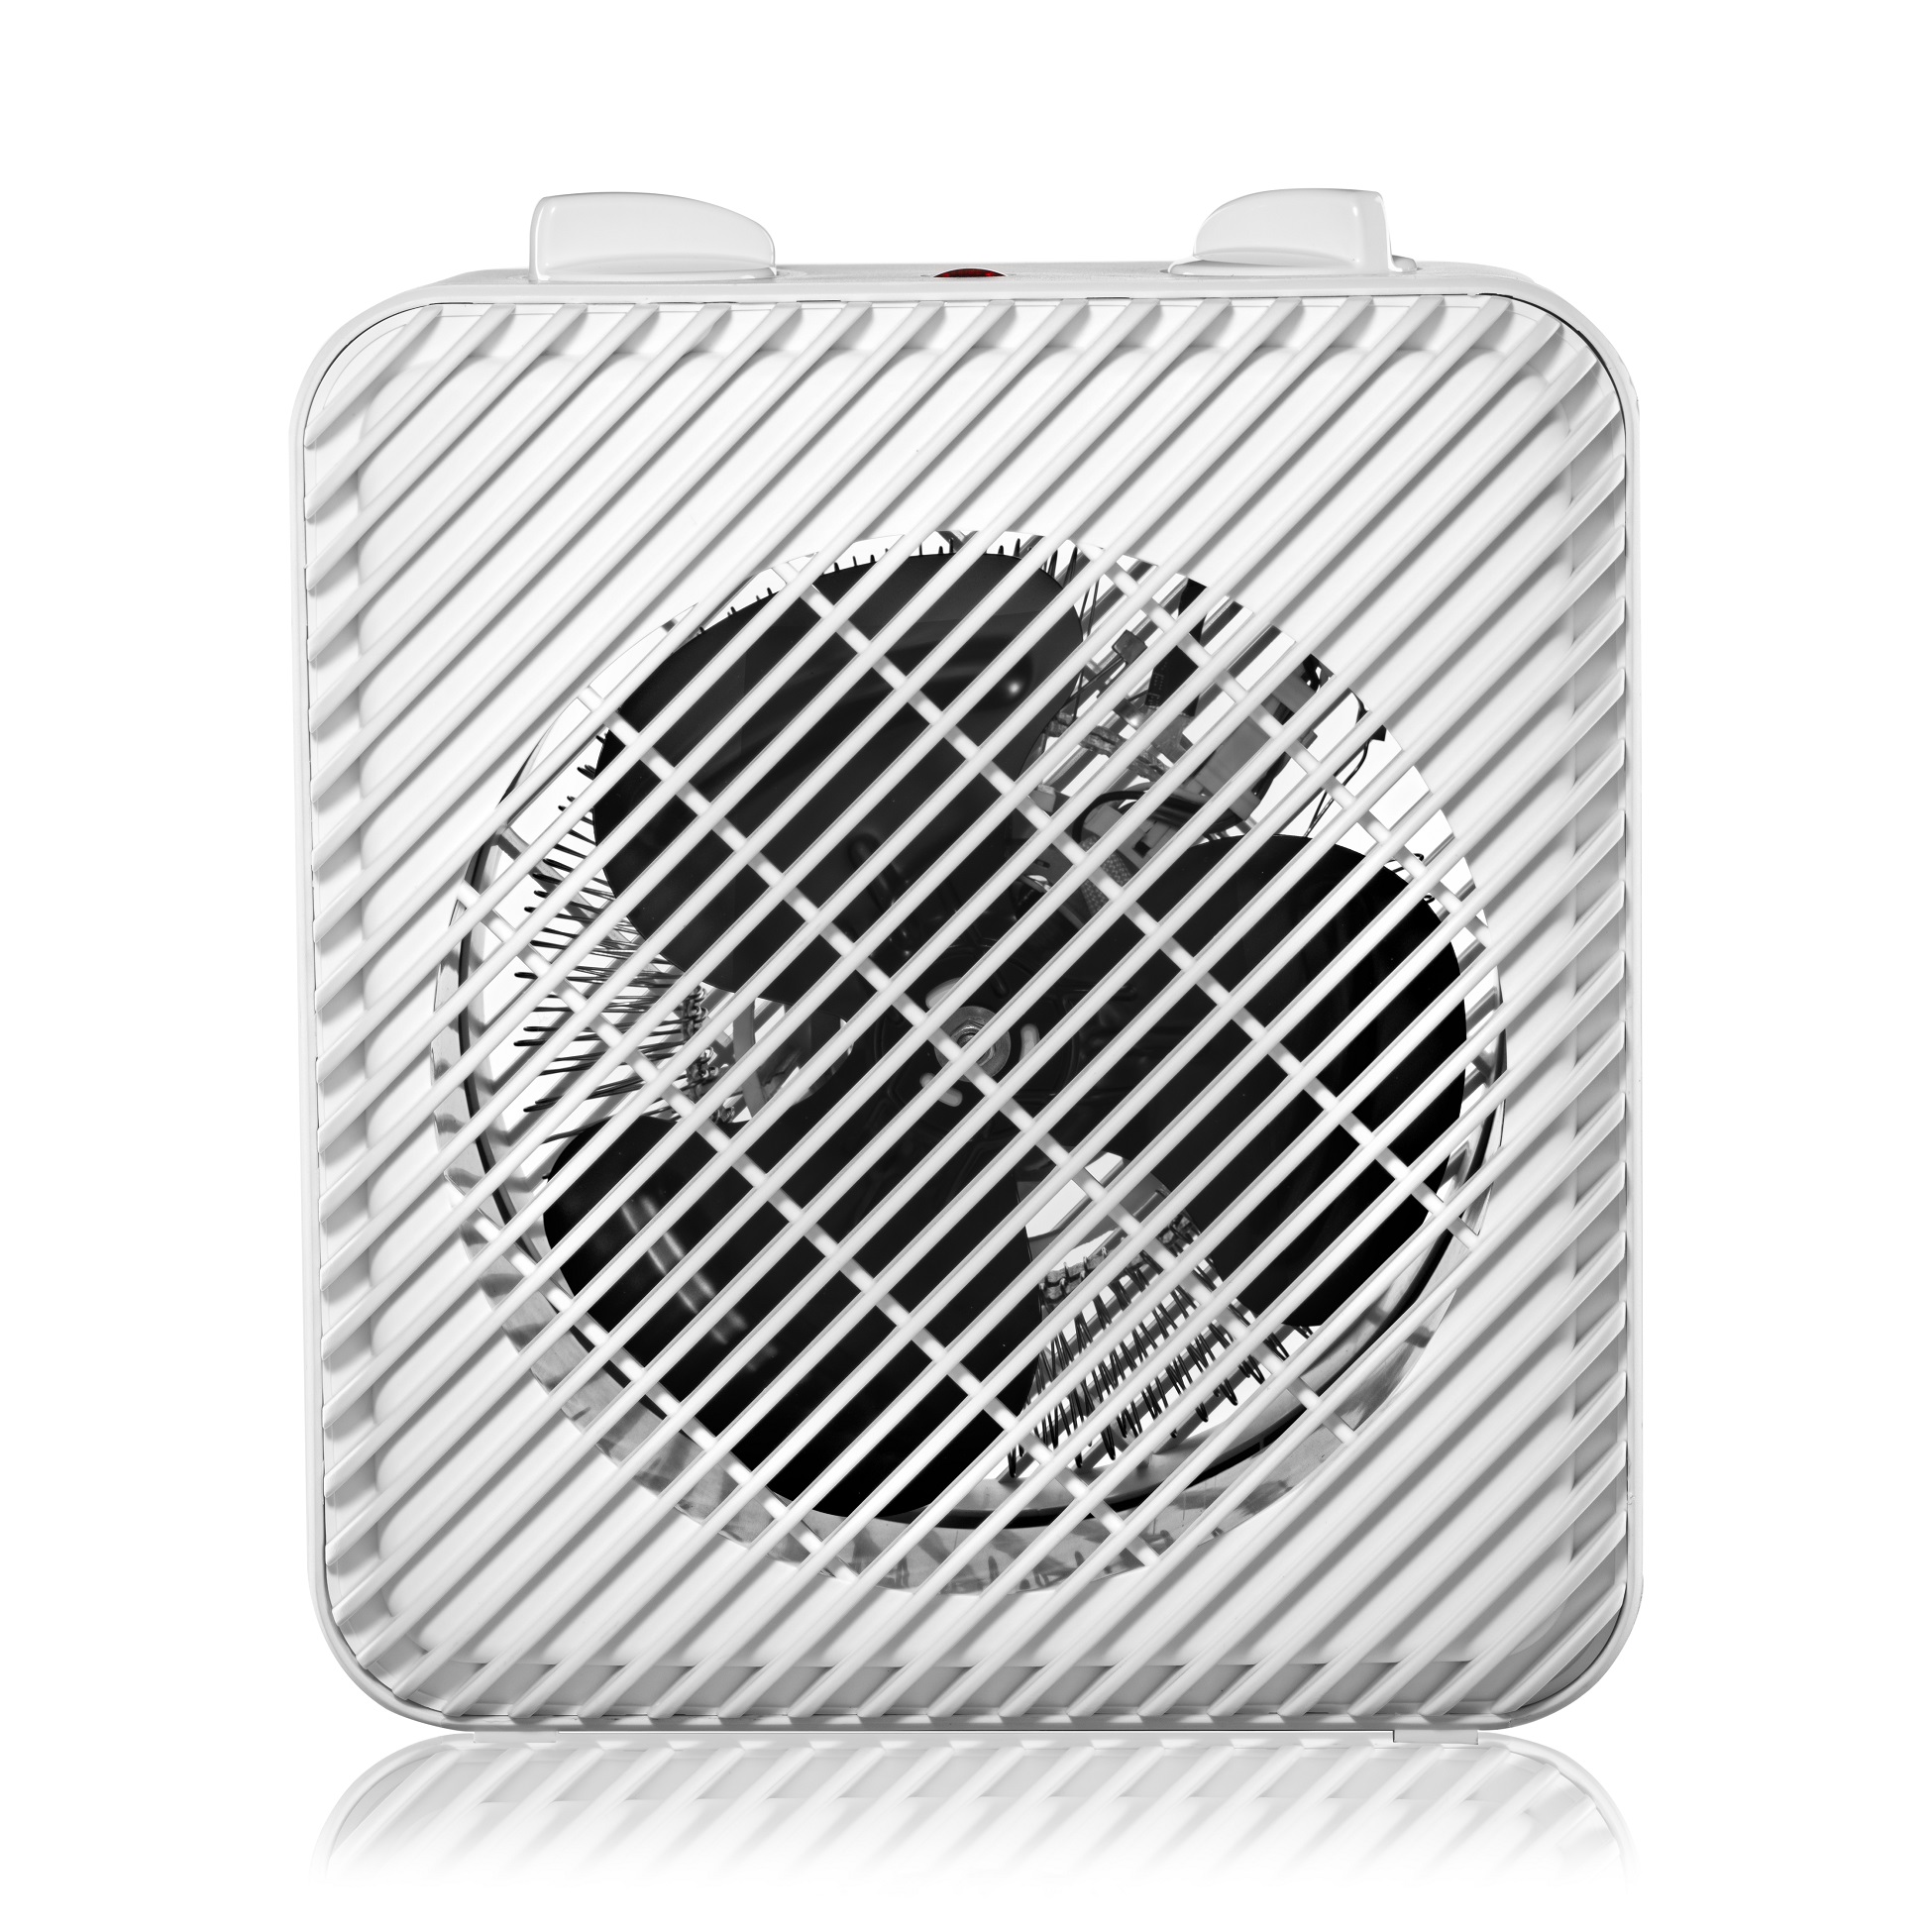 Mainstays 1500W 3-Speed Electric Fan-Forced Space Heater with Adjustable Thermostat, White - image 5 of 9